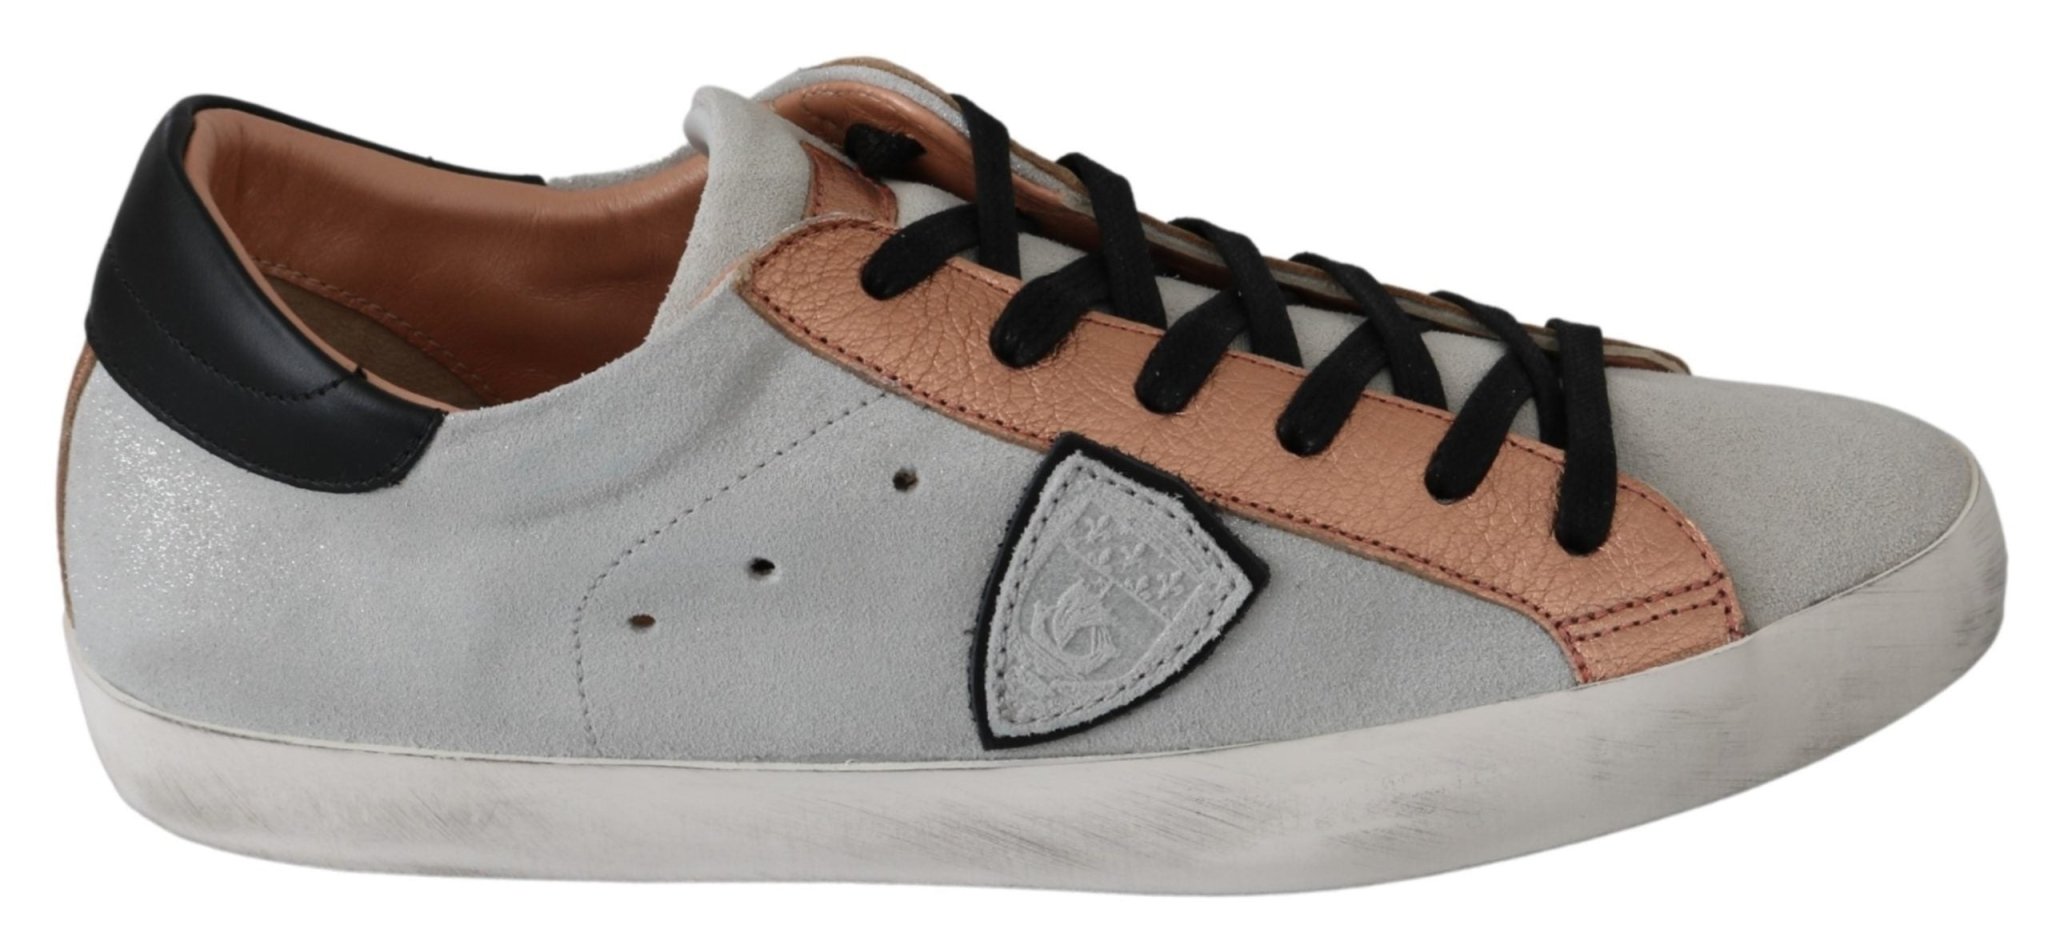 Philippe Model Gray Rose Leather Casual Mens Sneakers Shoes - Fizigo